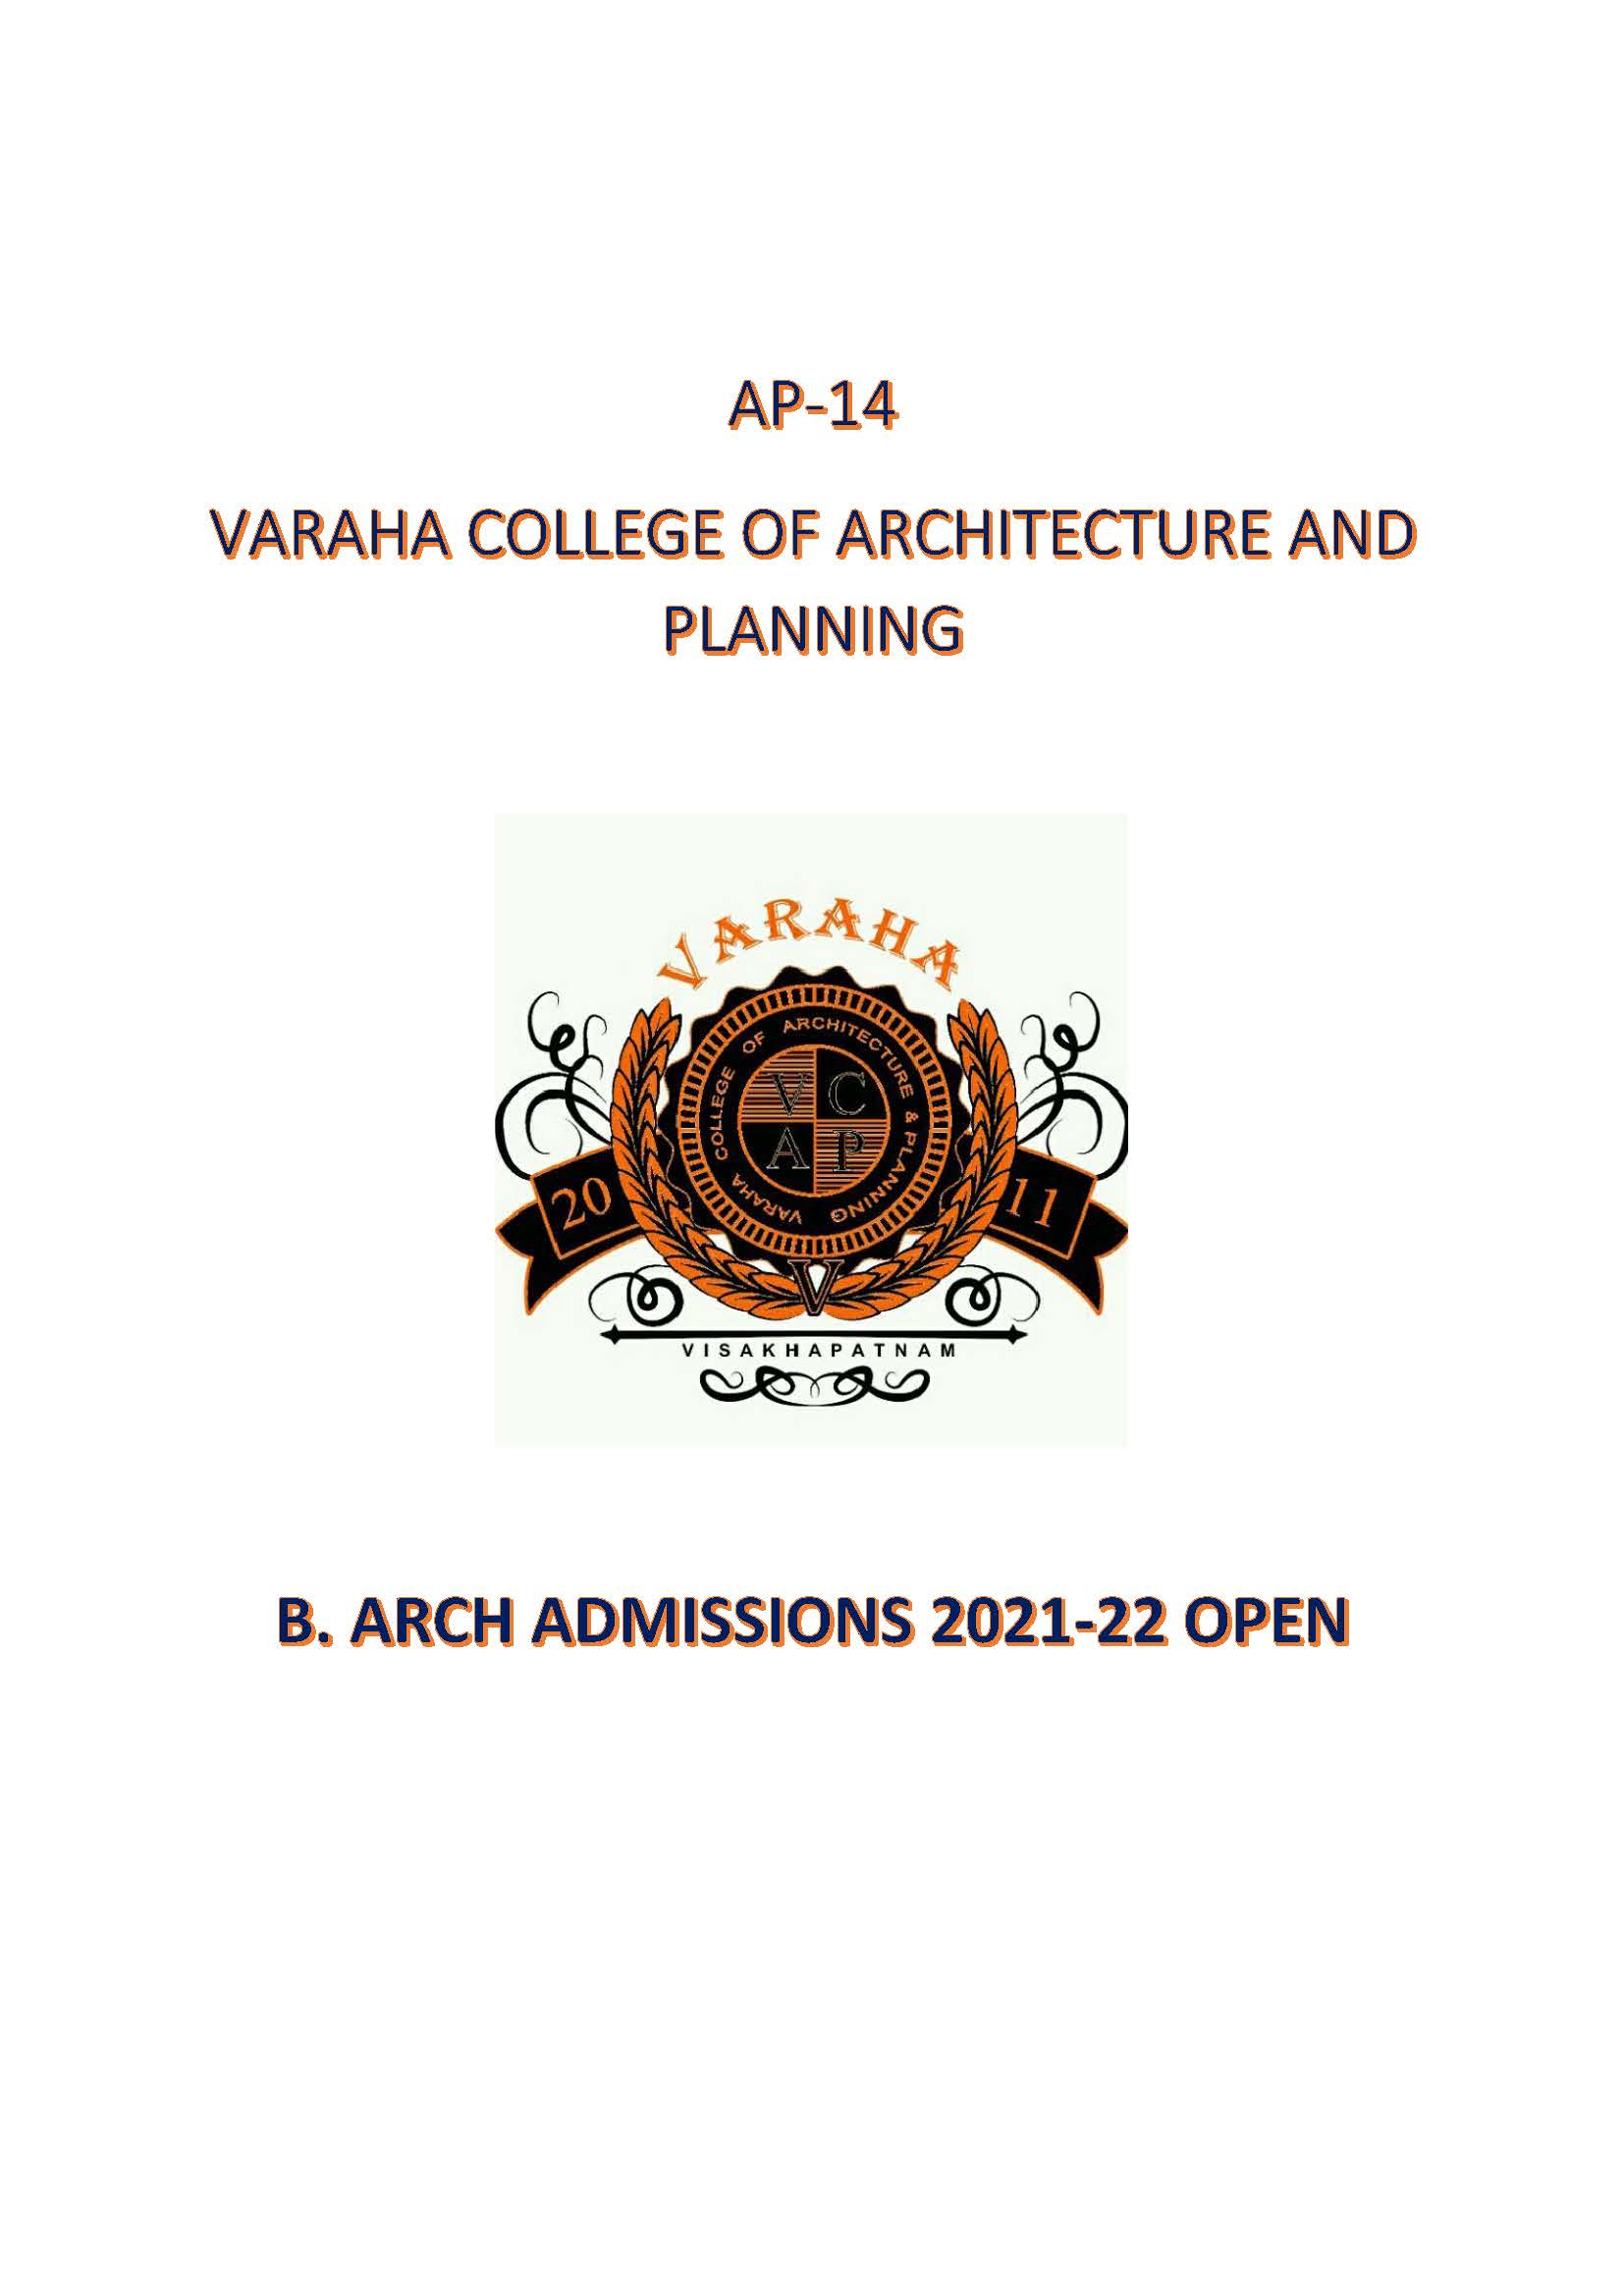 B.Architecture Admissions- Extension of Registration